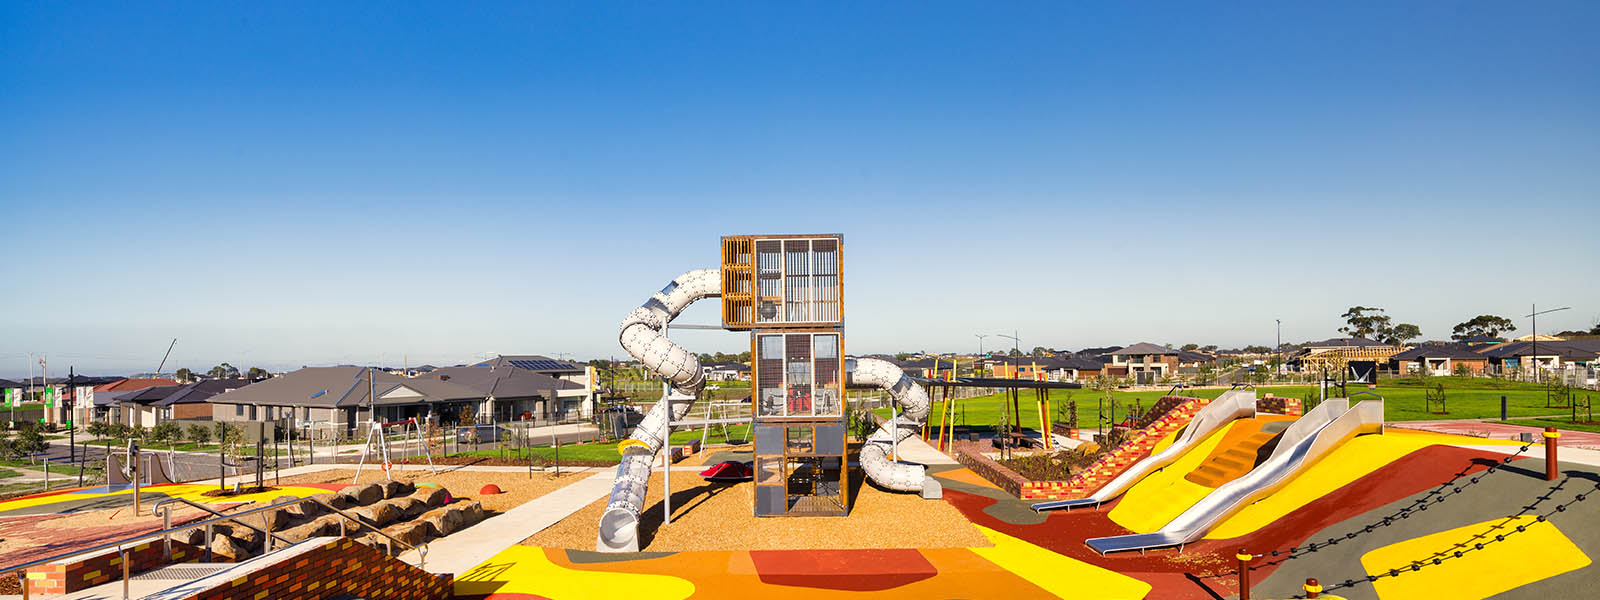 The design of this adventure playground is vibrant